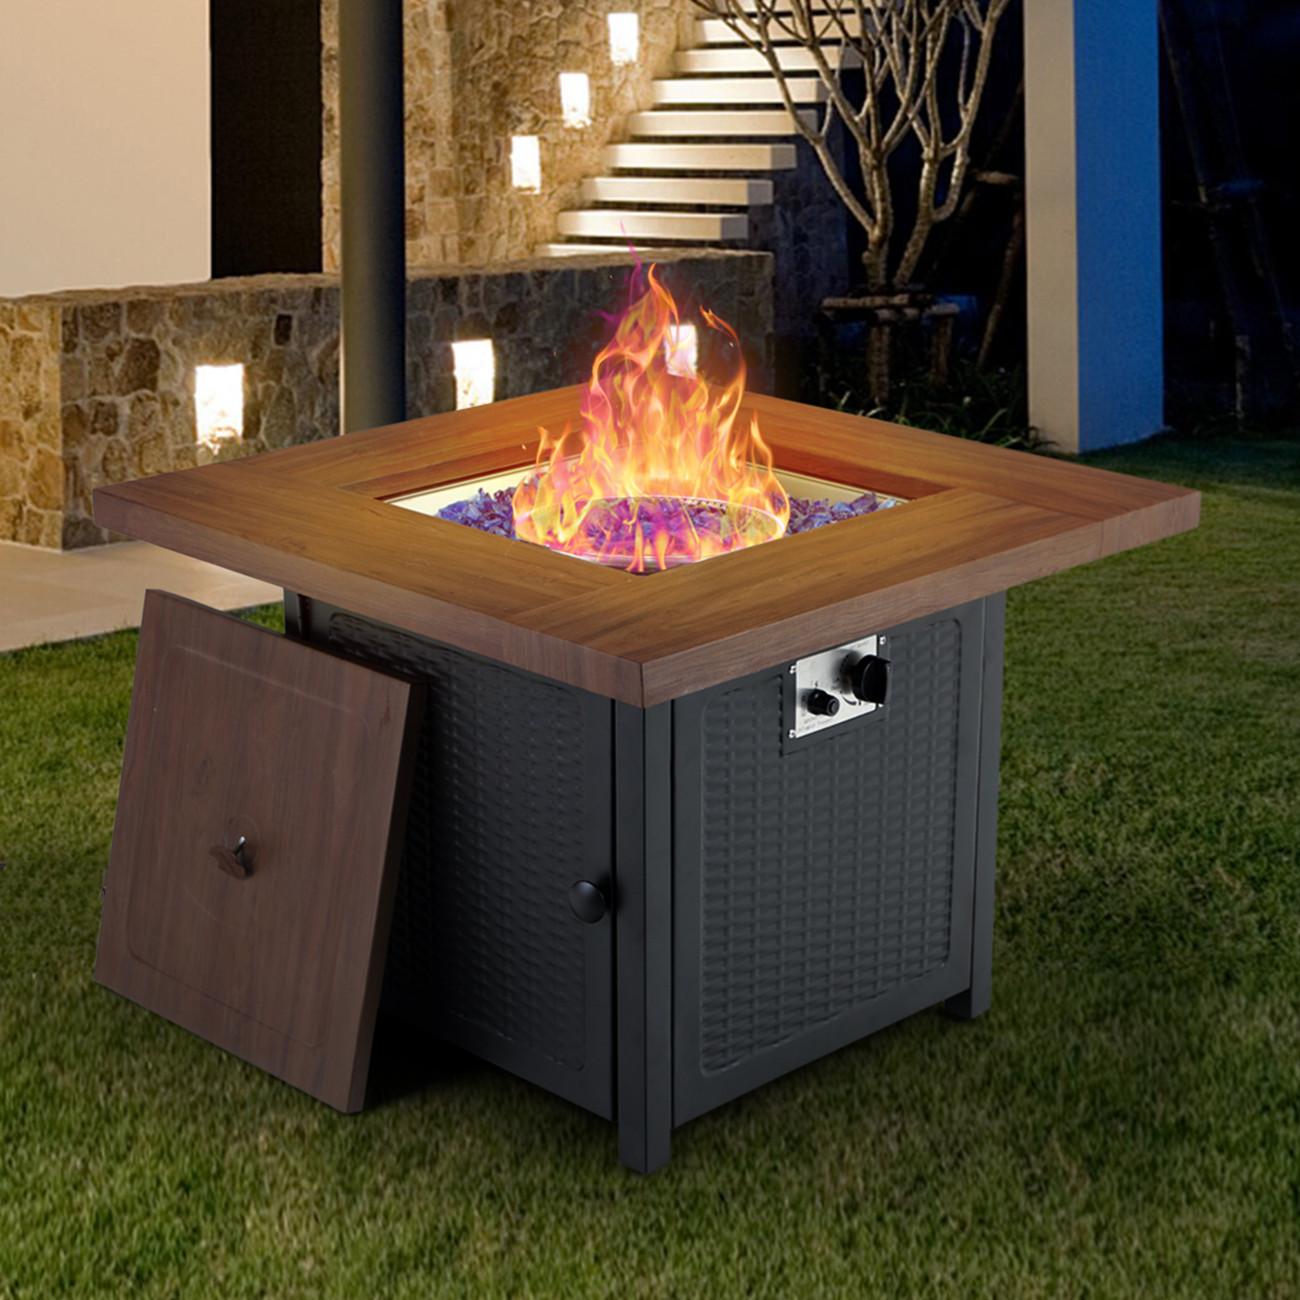 Sophia & William 34 inch Outdoor Square Gas Fire Pit Table with Lid